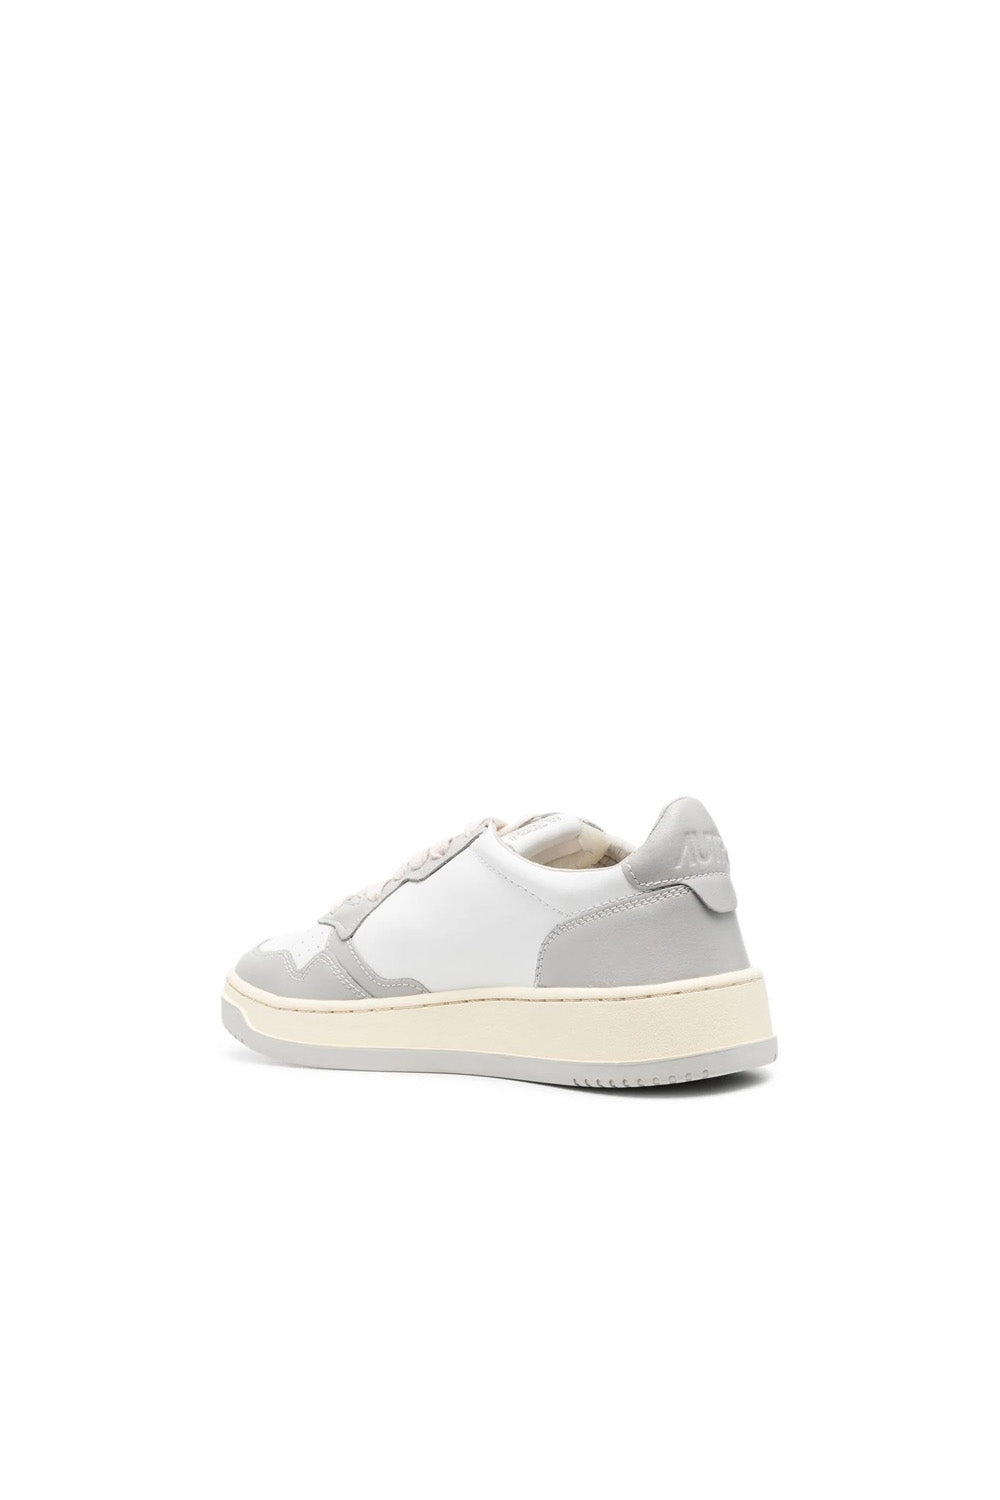 Autry Medalist two-tone sneakers